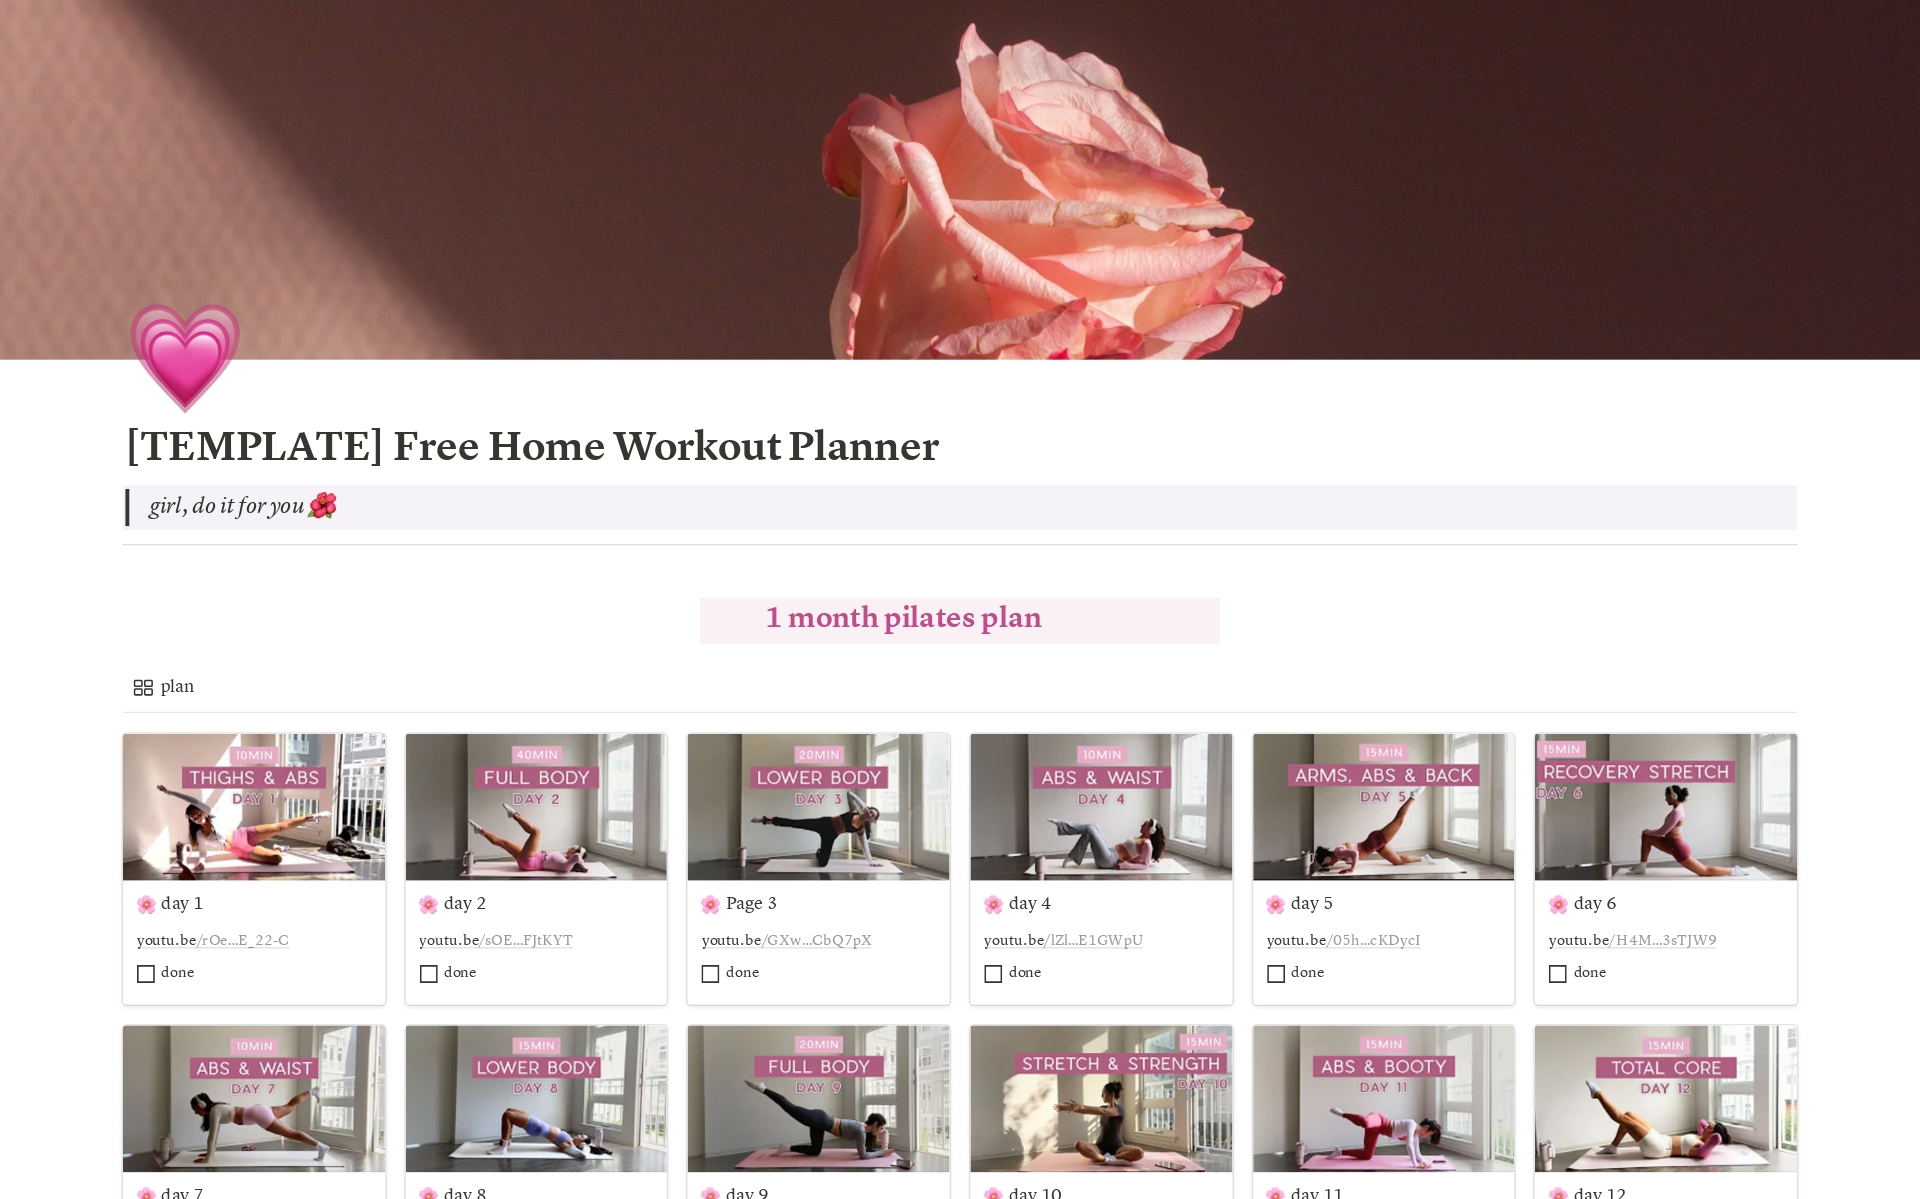 🎀 Free Home Workout Planner Notion template includes a 1-month pilates plan and a monthly tracker to monitor your progress.

Take the first step towards a healthier, happier you today! 😍